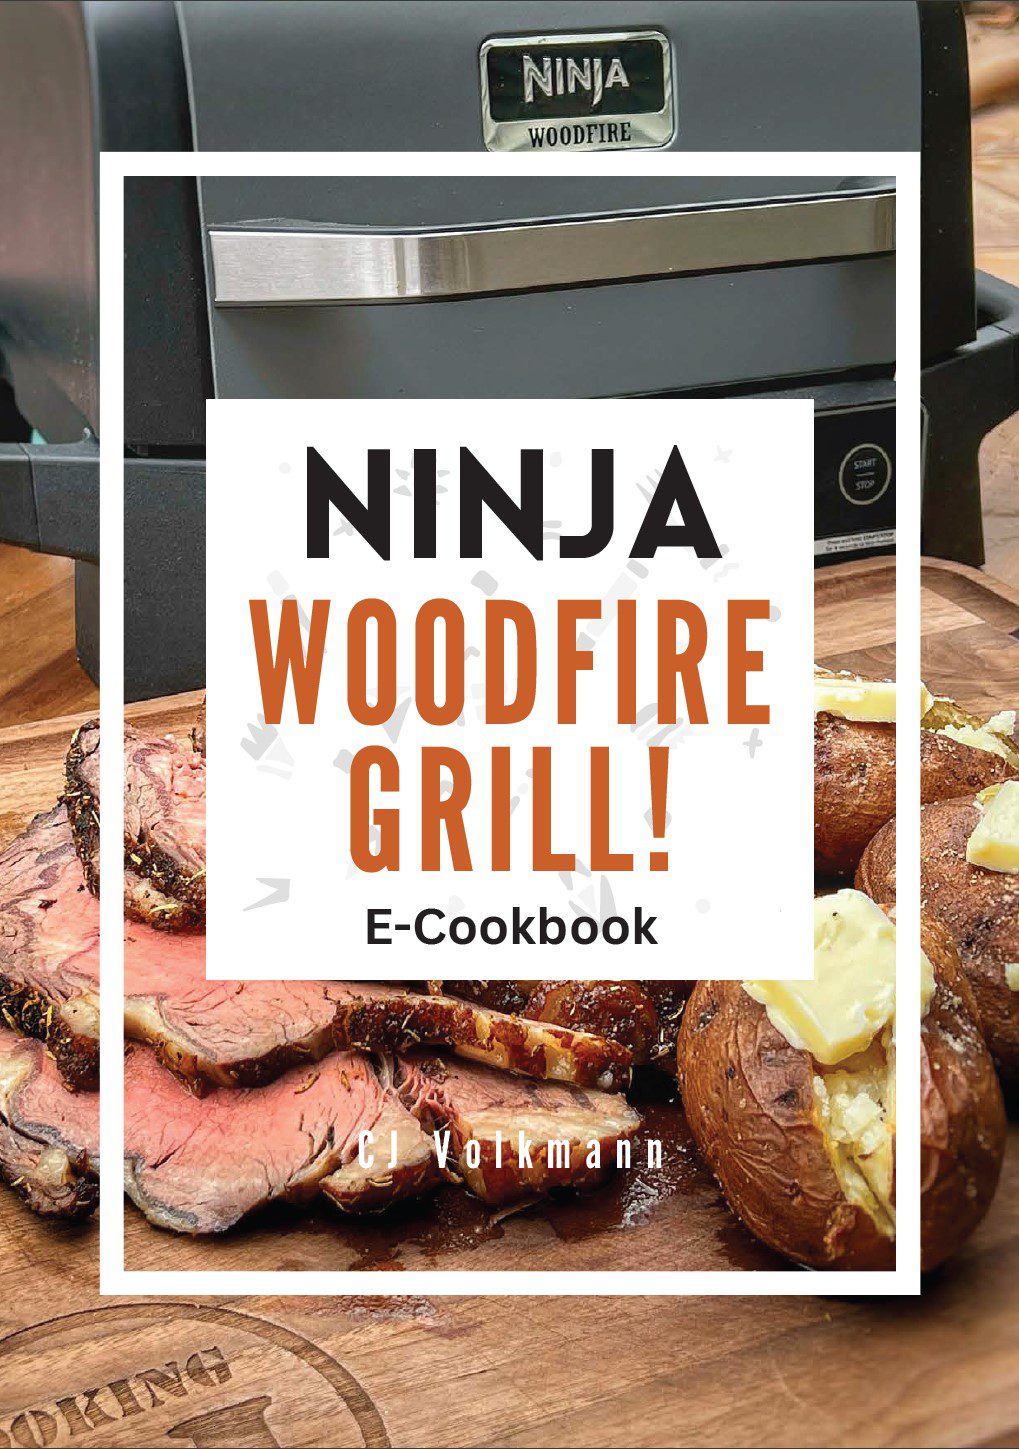 Ninja Woodfire Outdoor Grill & Smoker Cookbook 2023: 1600 Days of Simple  and Scrumptious Ninja Woodfire Grill & Smoker Recipes for BBQs, Parties,  Gatherings, Weeknight Dinners, Family Meals, and More: D. Jones